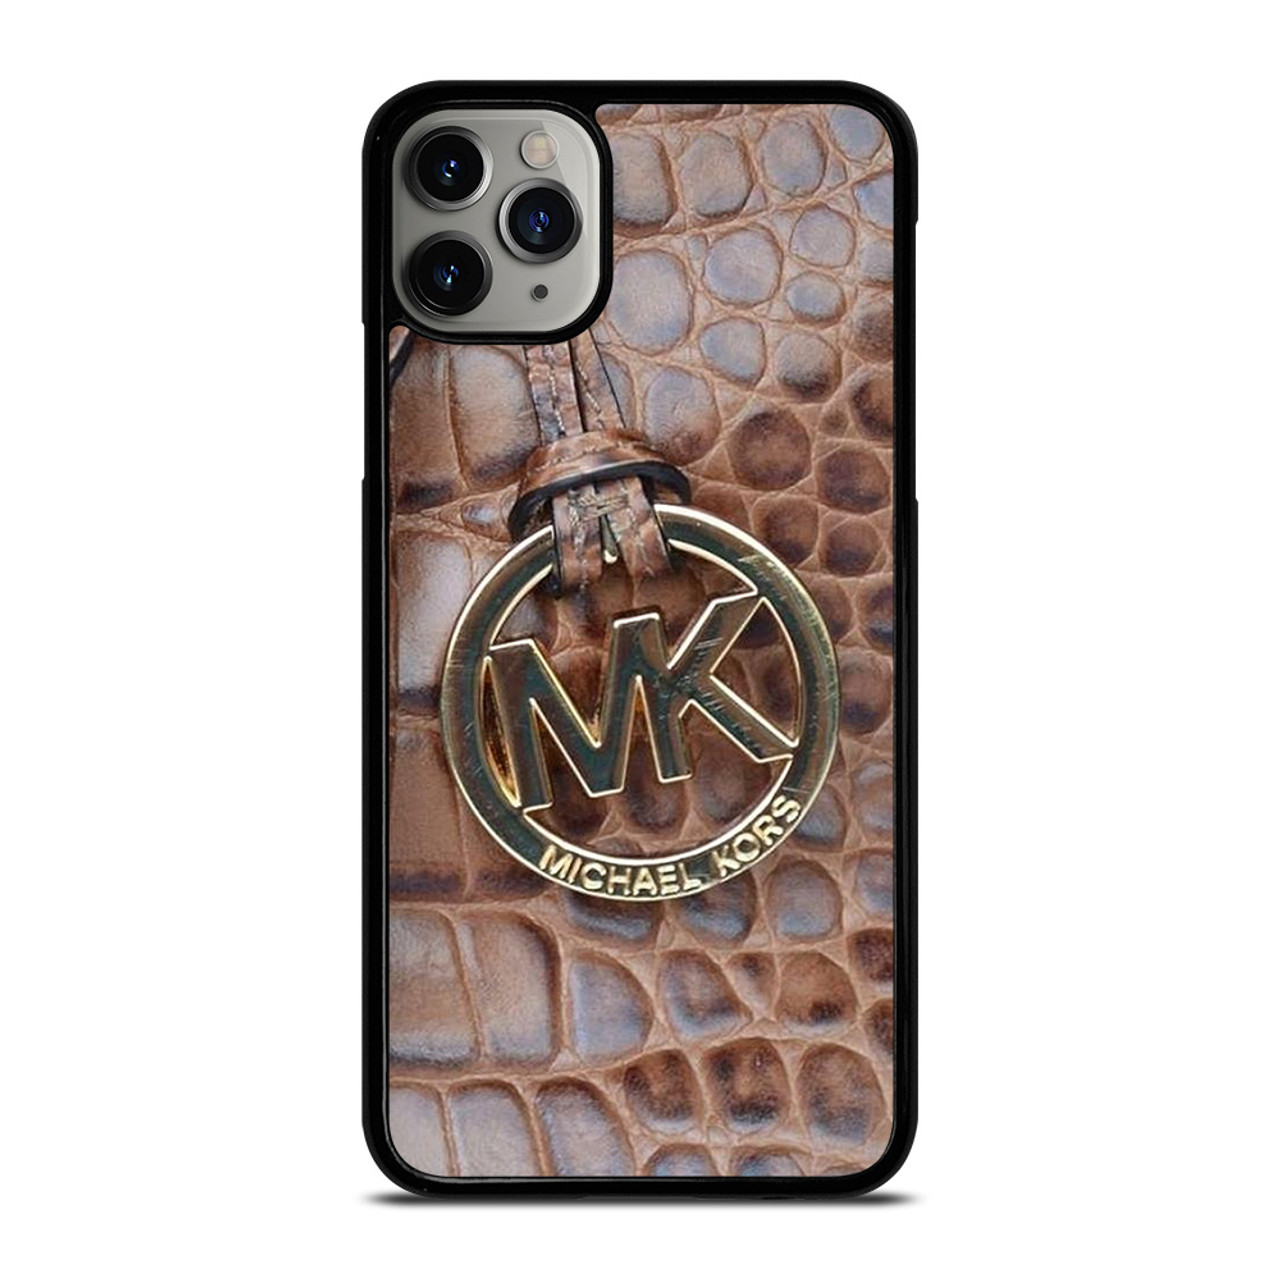 MICHAEL KORS BROWN LEATHER iPhone 11 Pro Max Case Cover